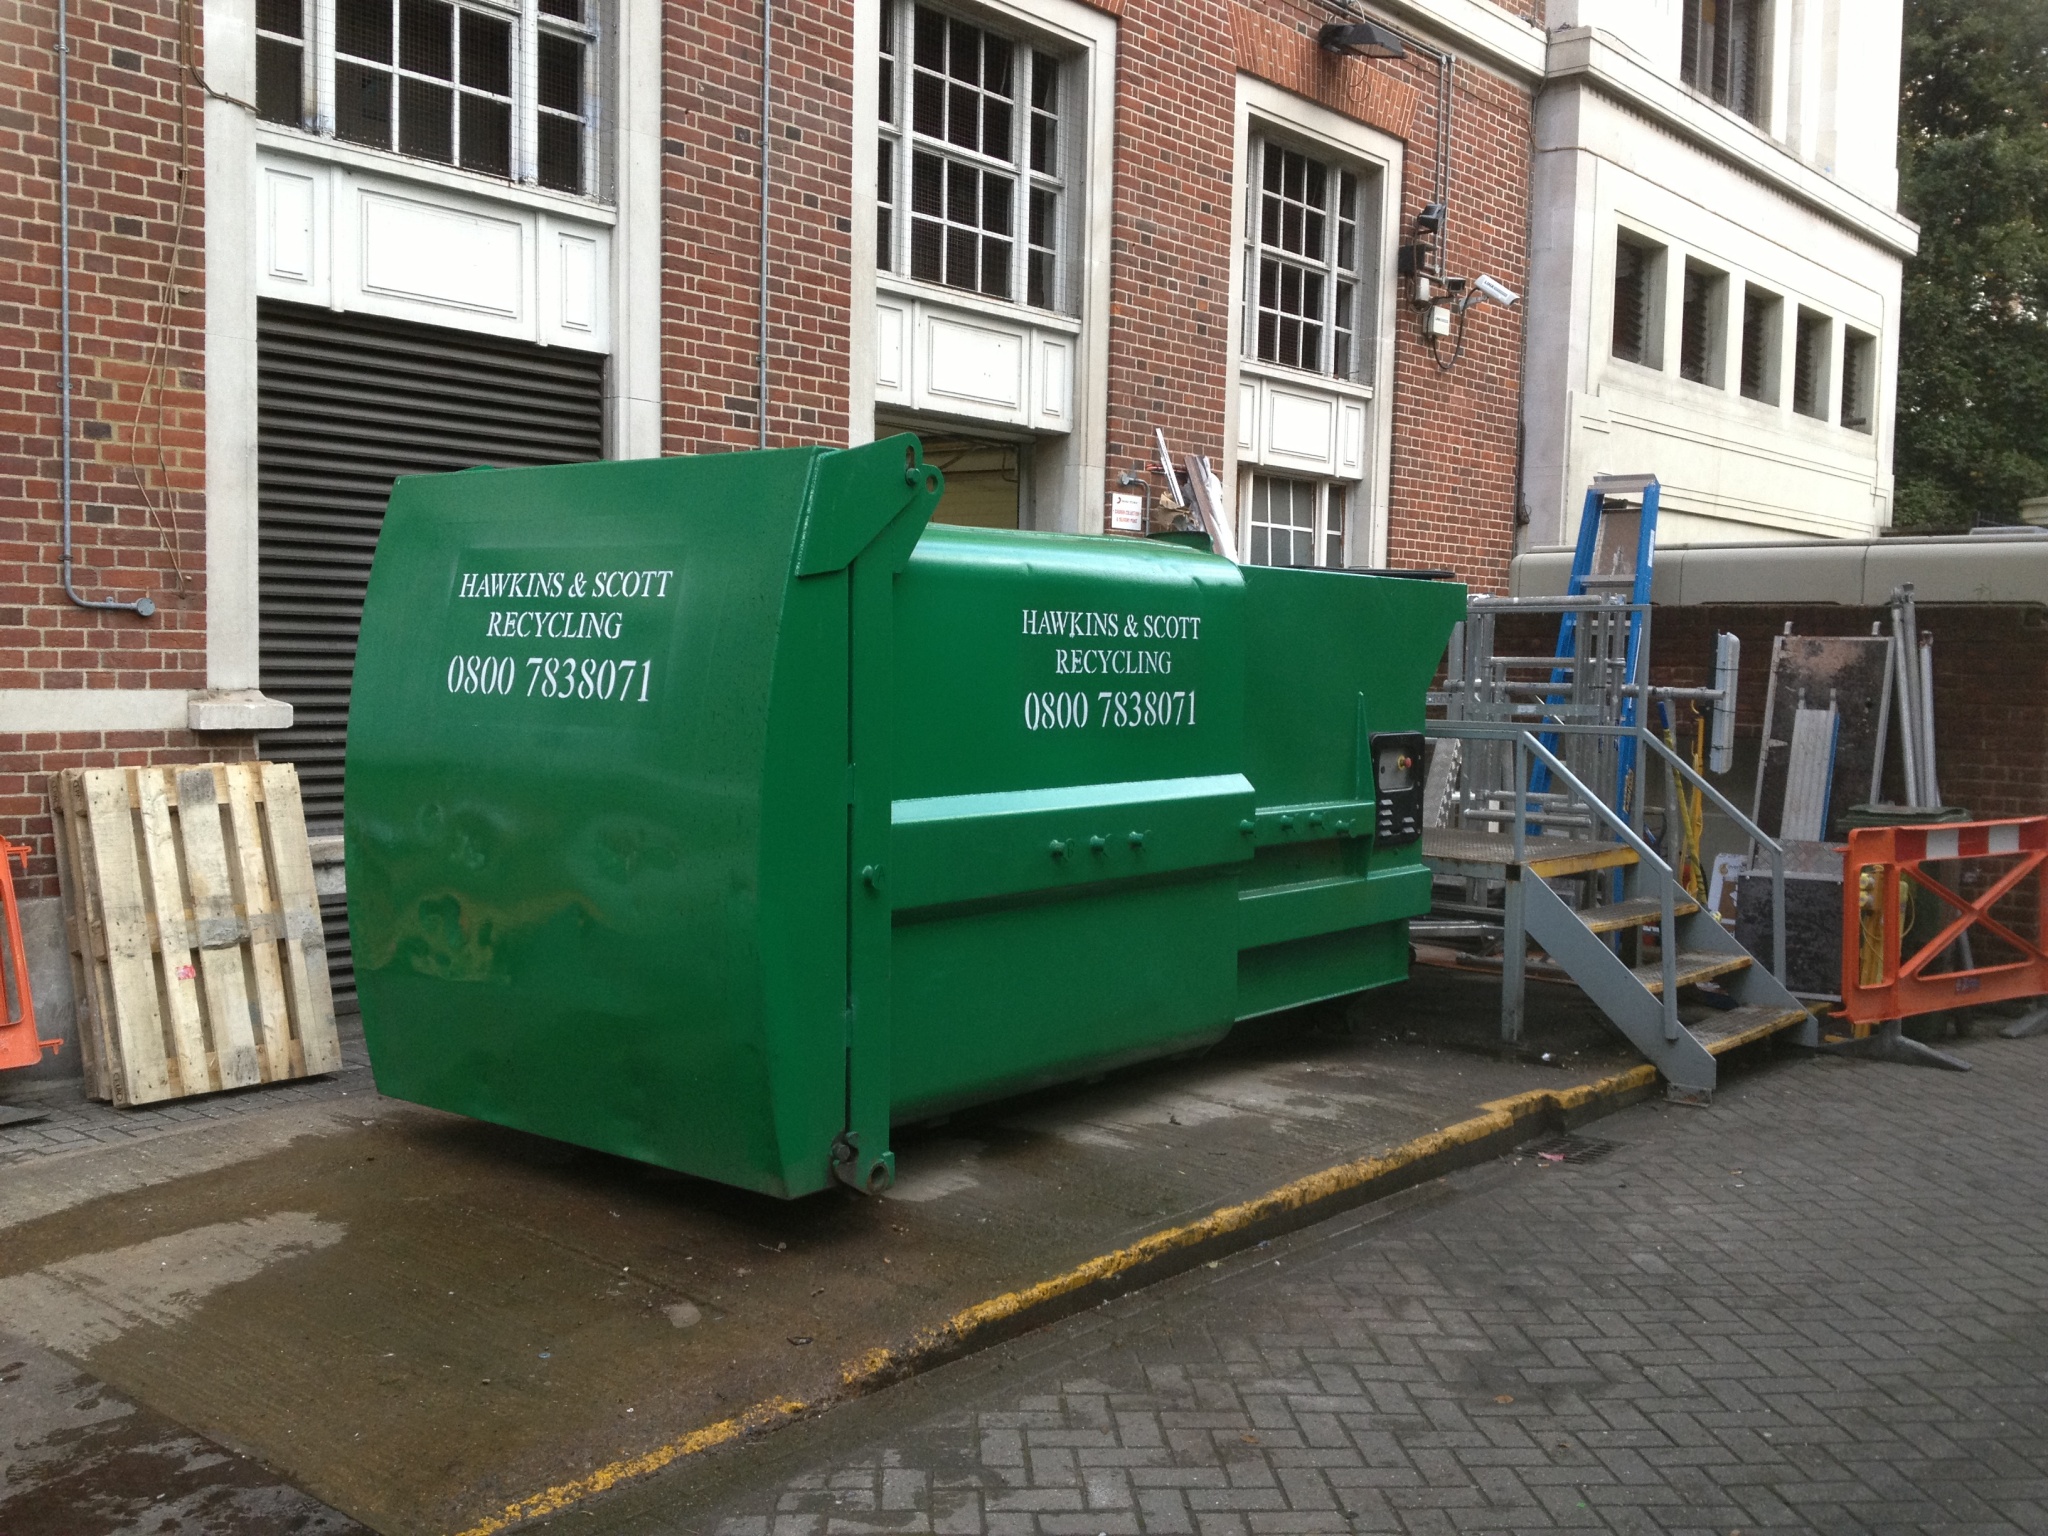 Why Choose a Skip Hire Company for a Landscaping Business?